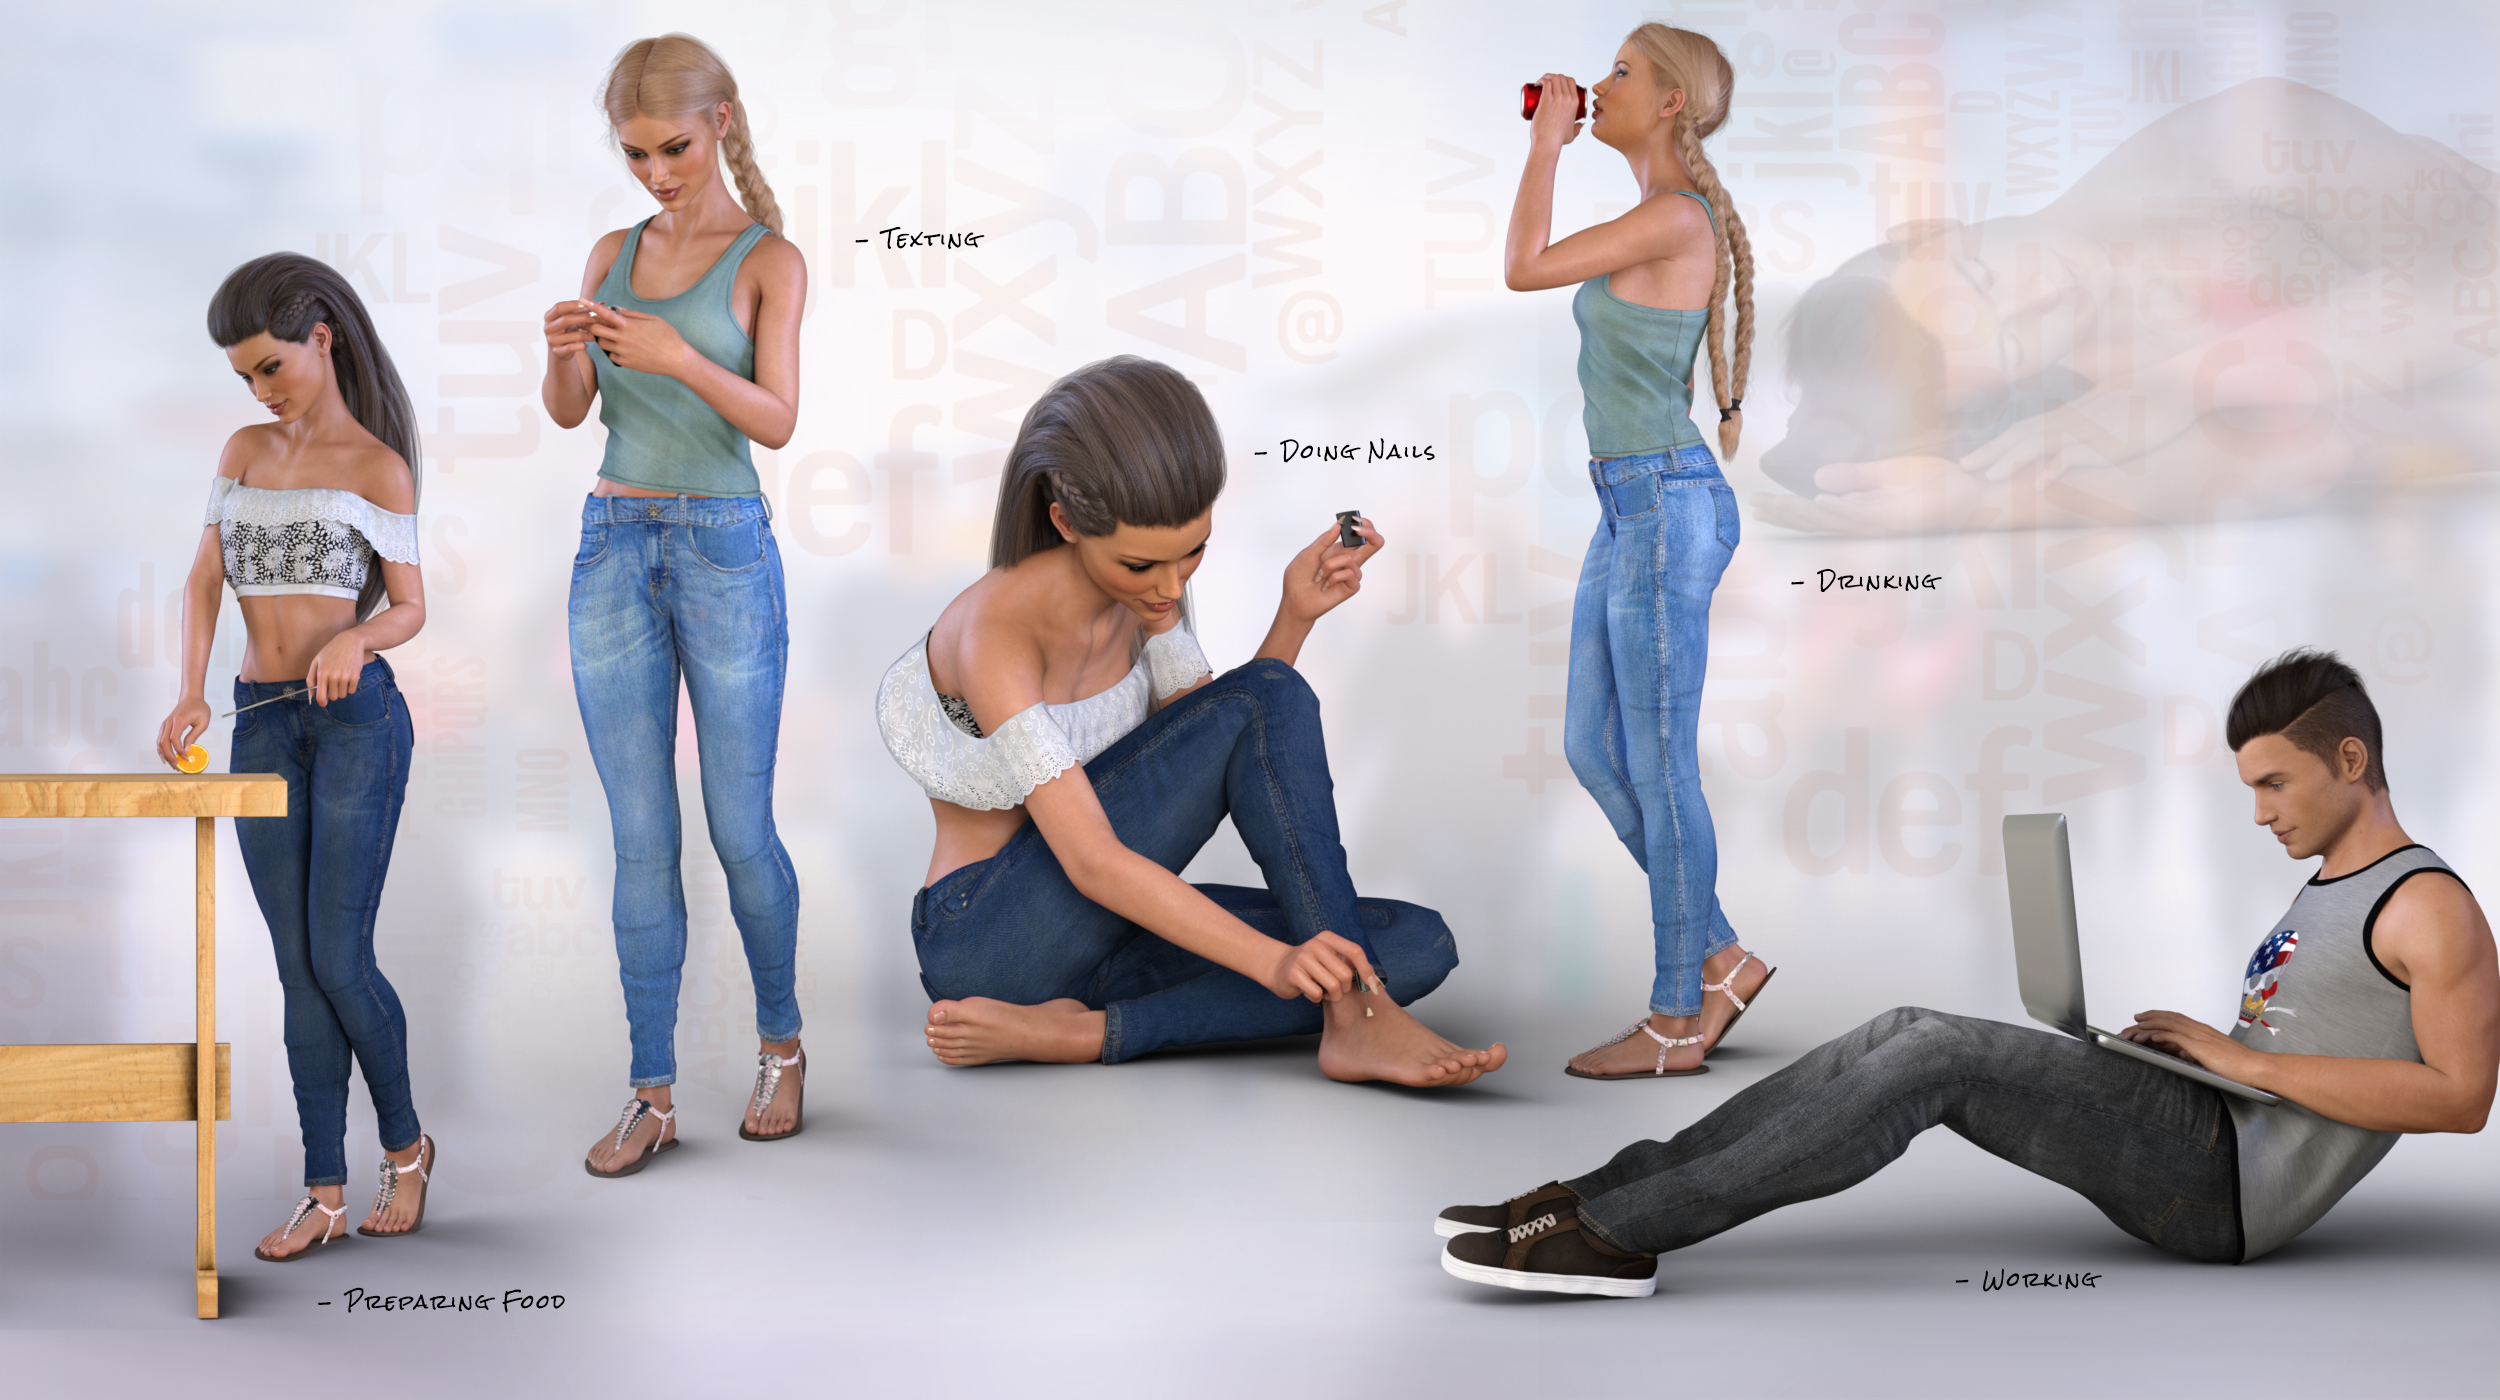 Z Everyday Life - Poses and Partials for Genesis 3 and 8 by: Zeddicuss, 3D Models by Daz 3D